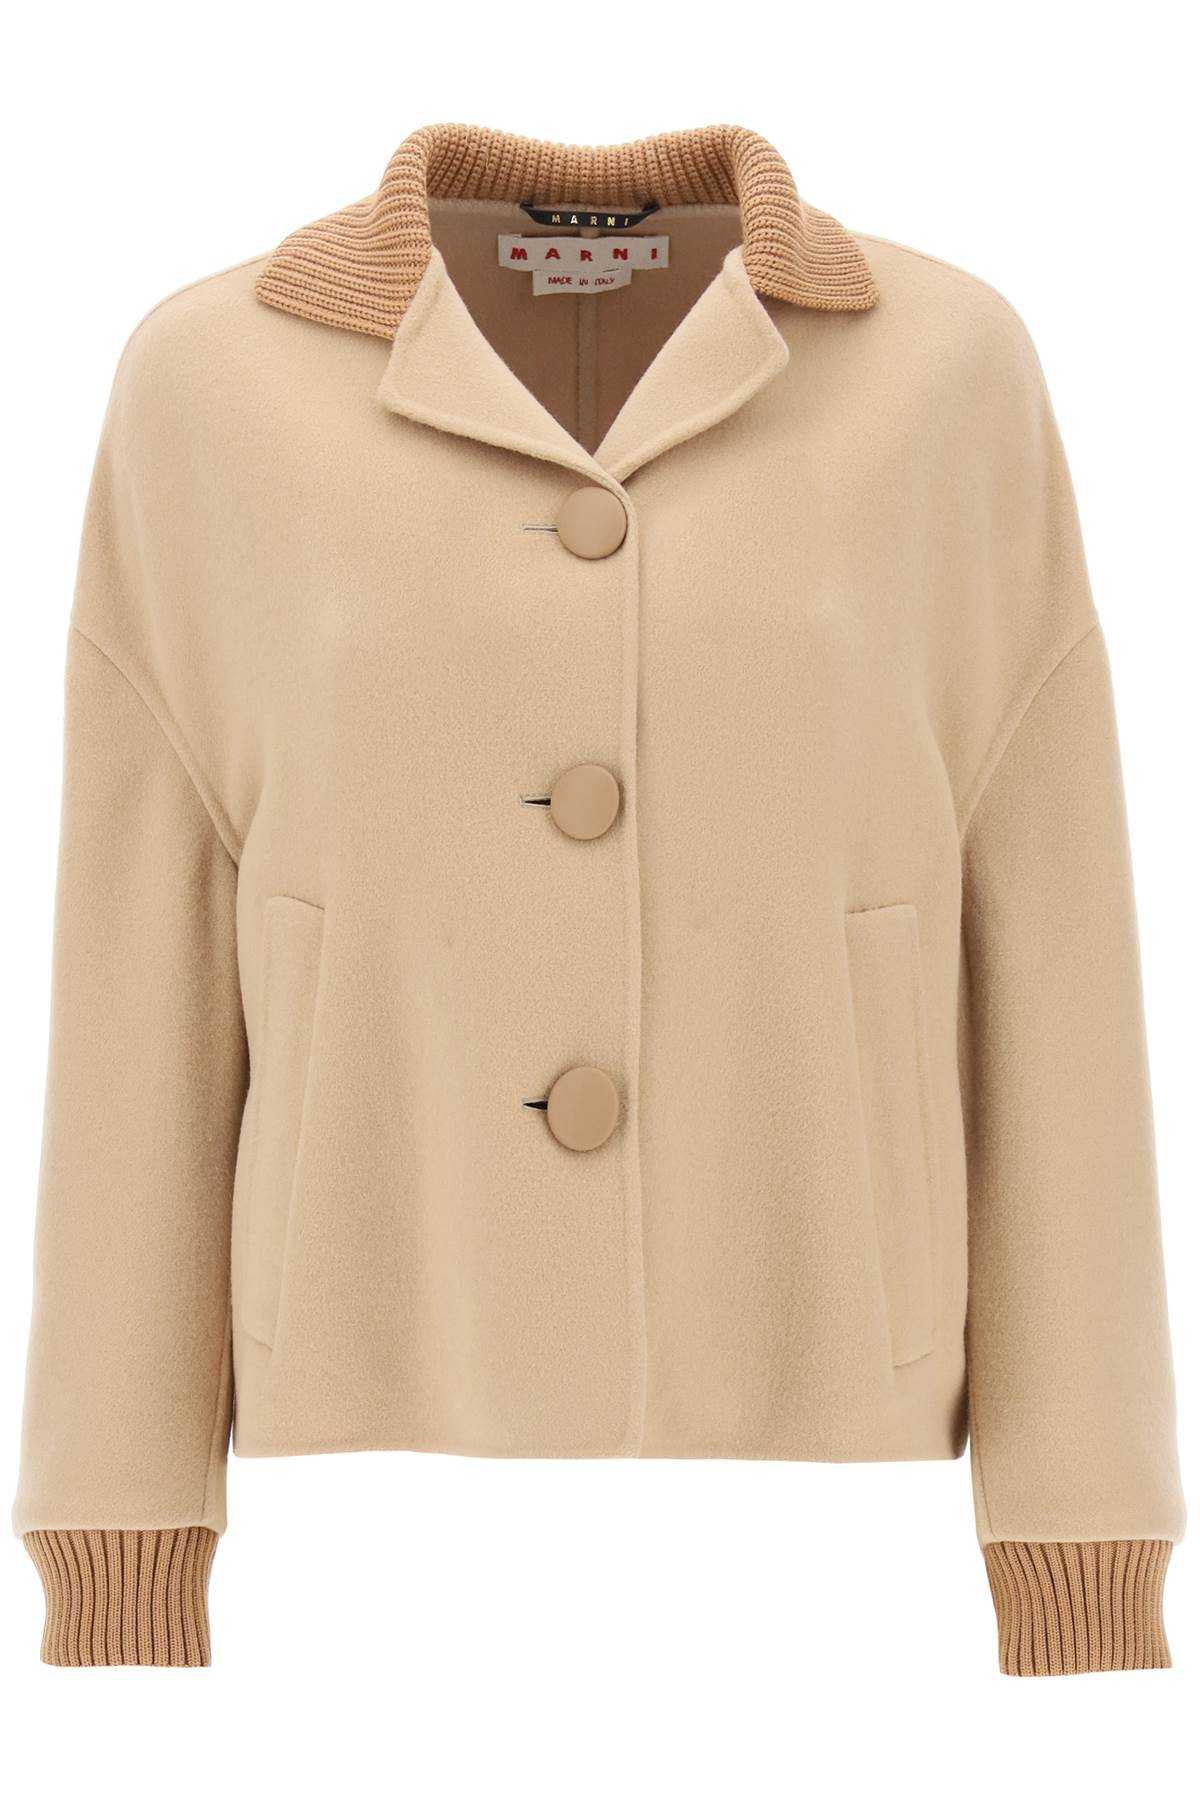 Shop Marni Wool And Cashmere Caban In Beige